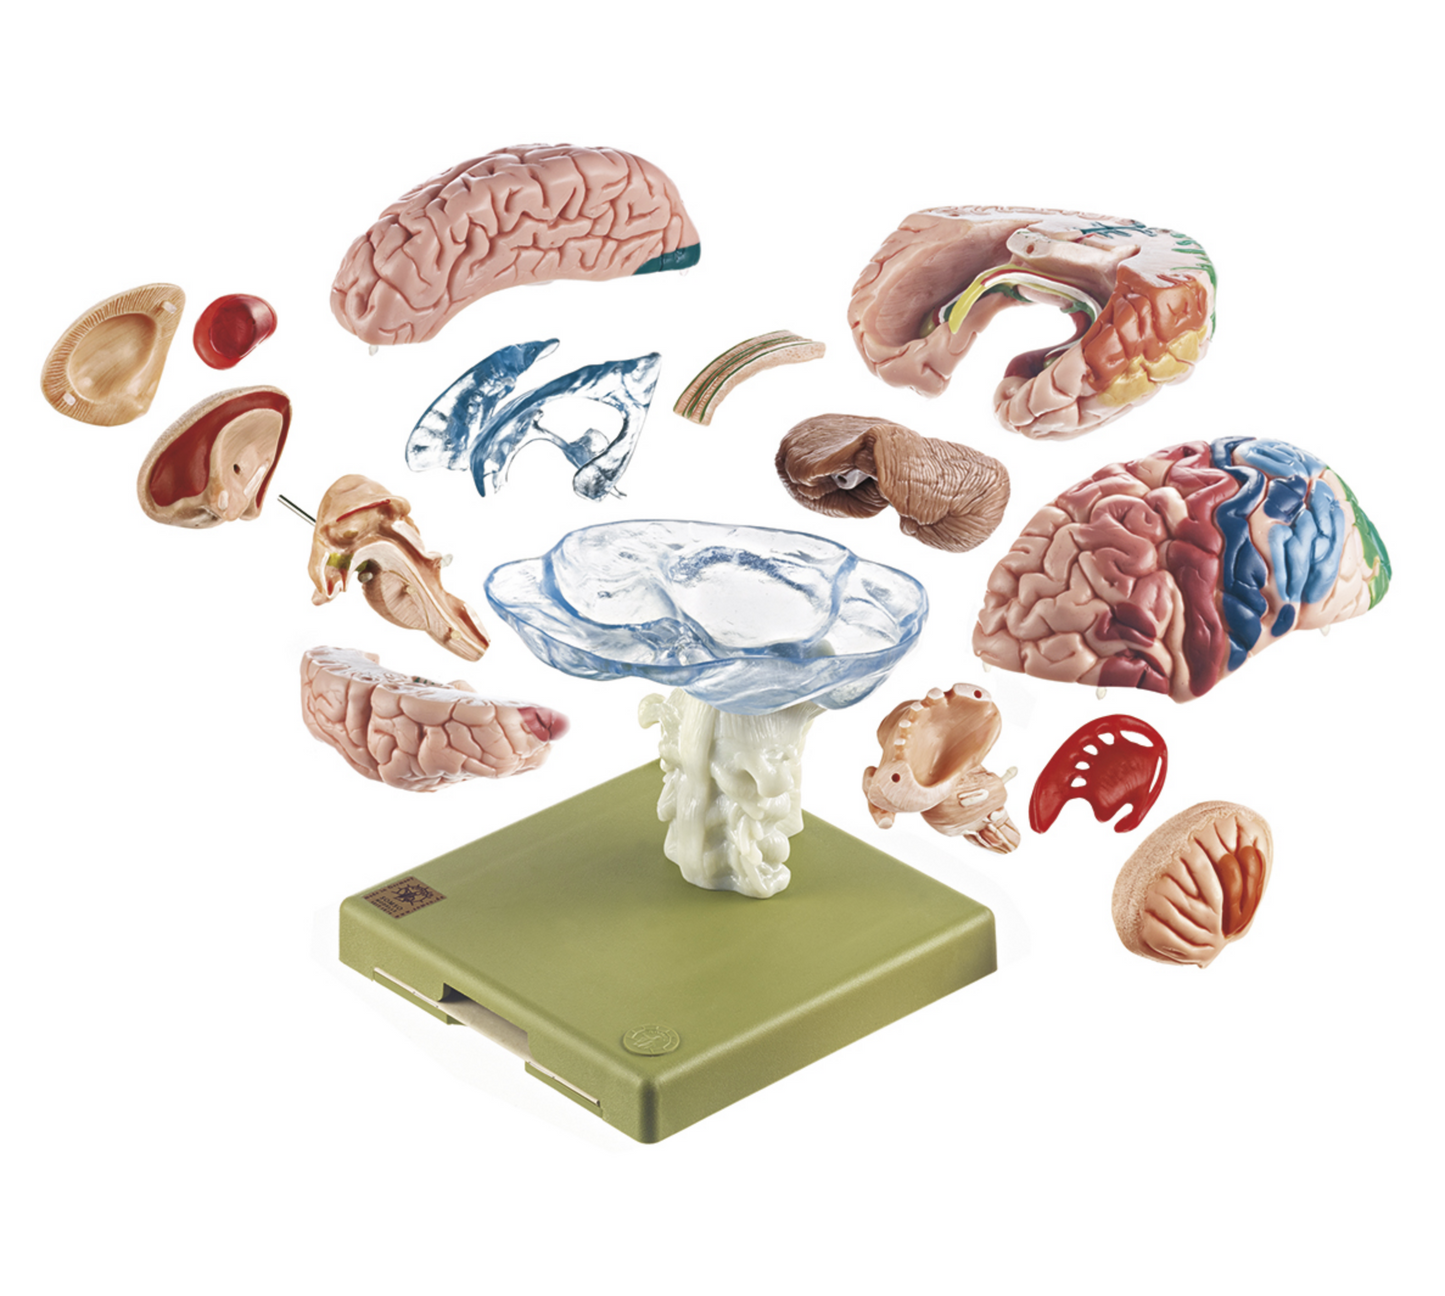 Brain model in the highest quality and many areas in educational colors. Can be separated into 15 parts